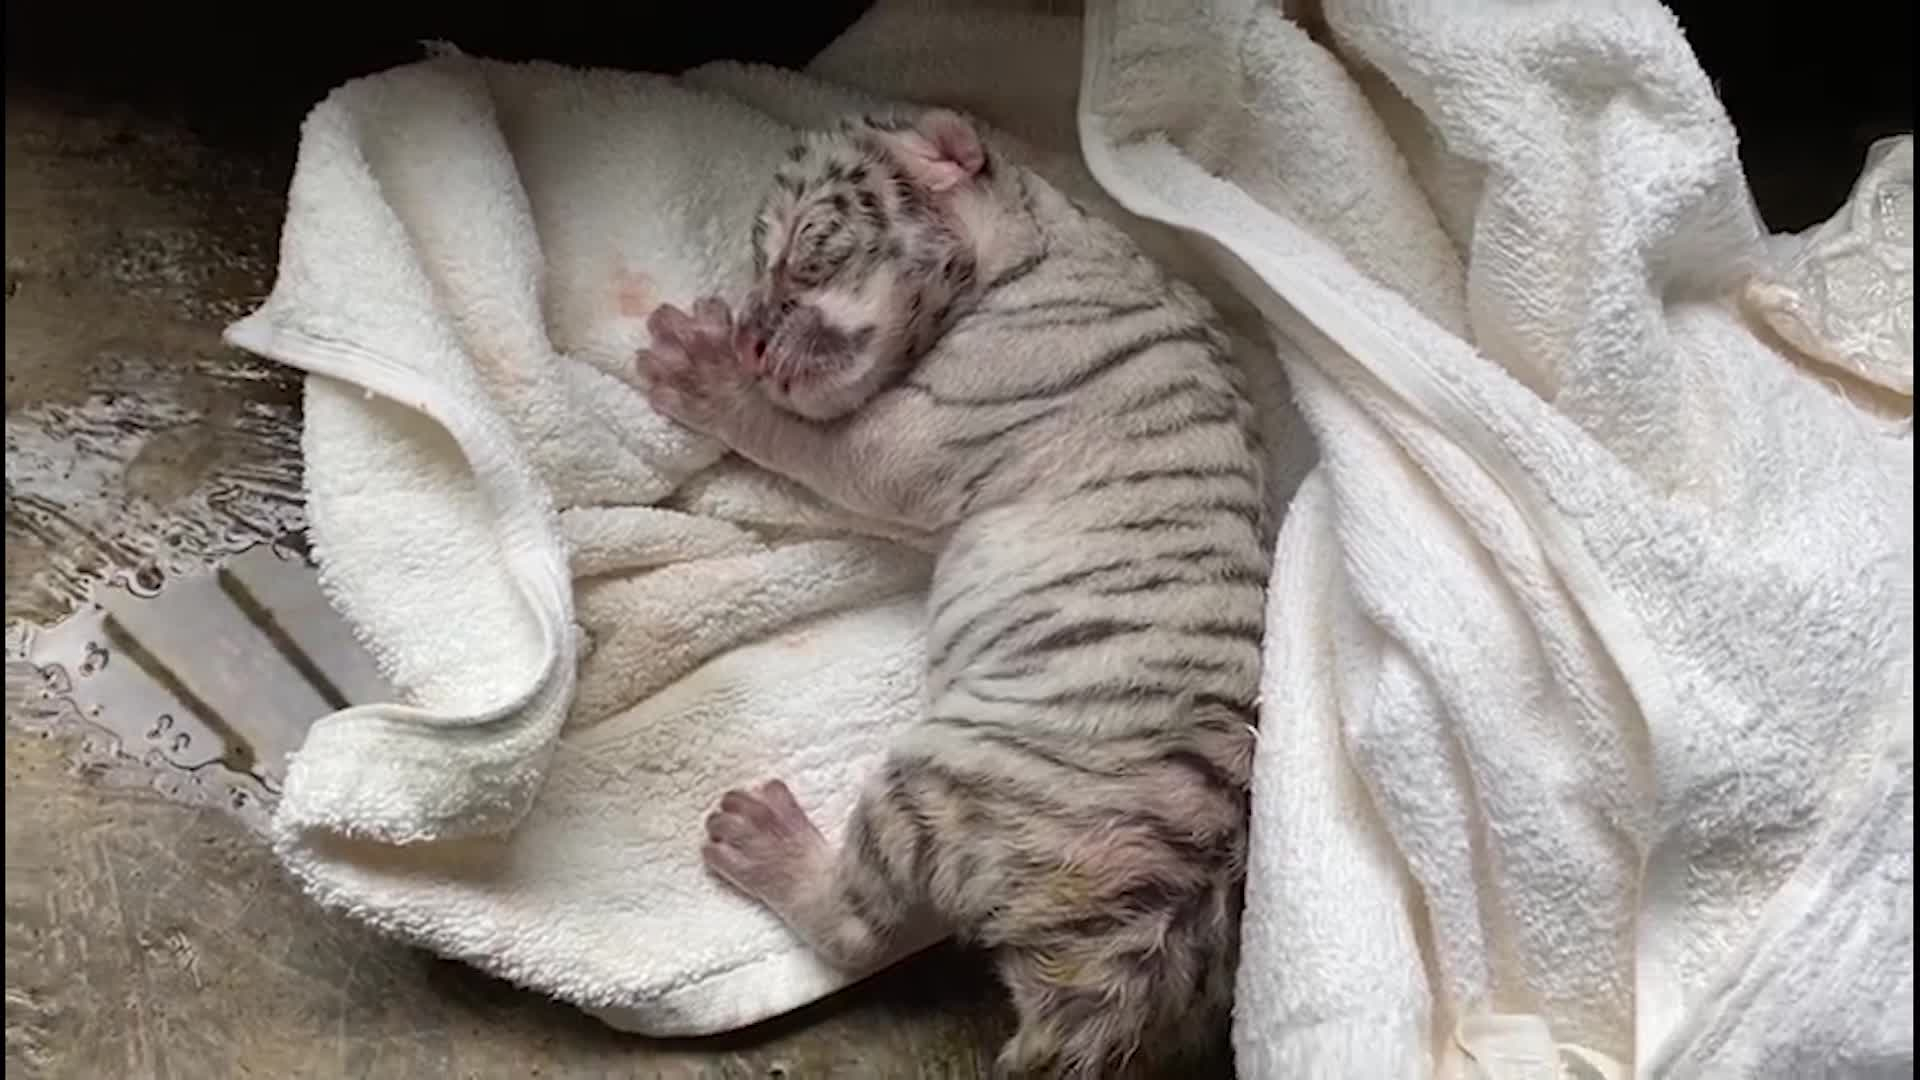 A newly born white tiger dies in captivity in Nicaragua